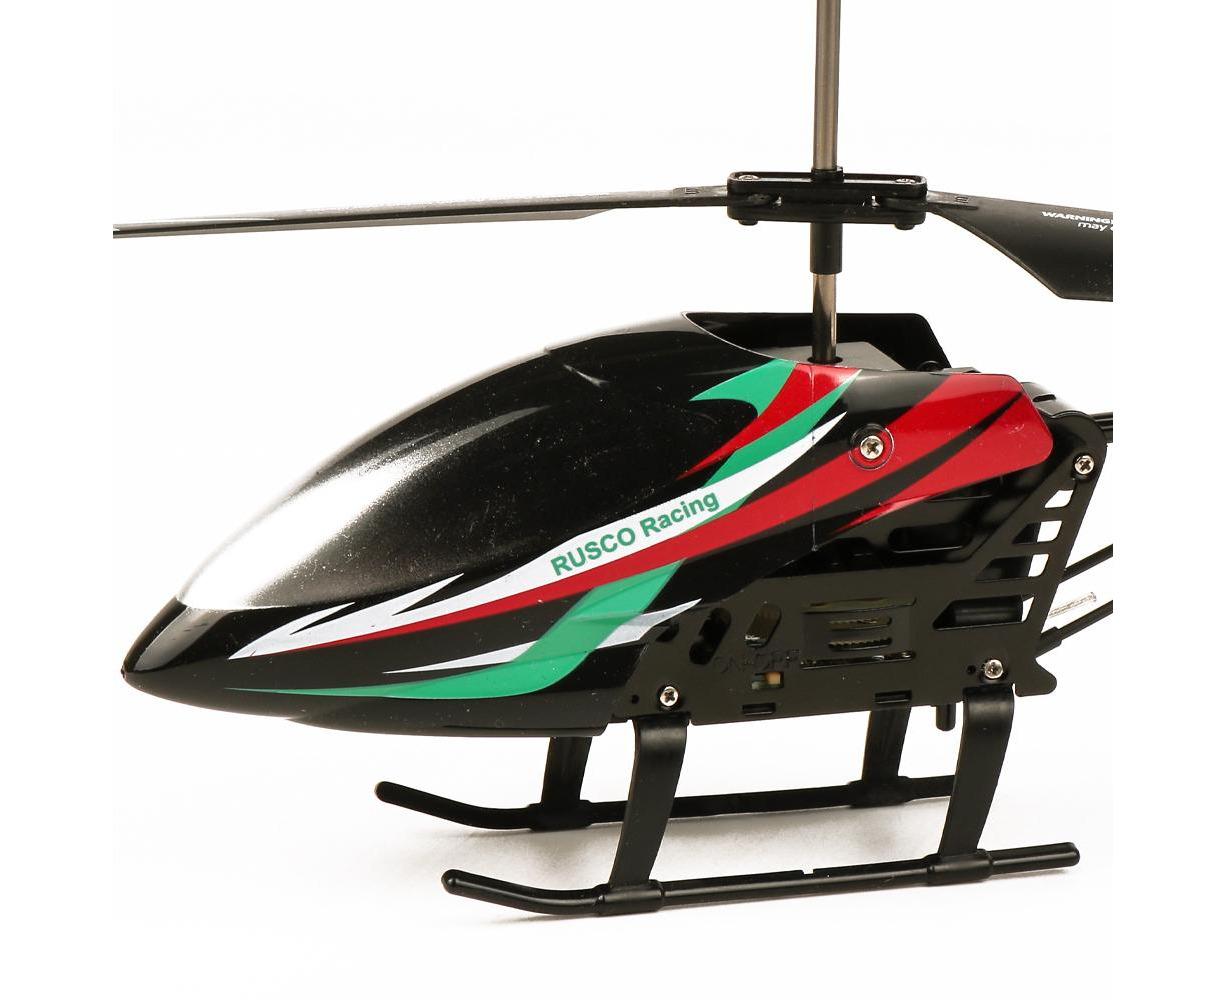 Rusco Racing Helicopter: The compact, customizable helicopter for high-speed drone racing.